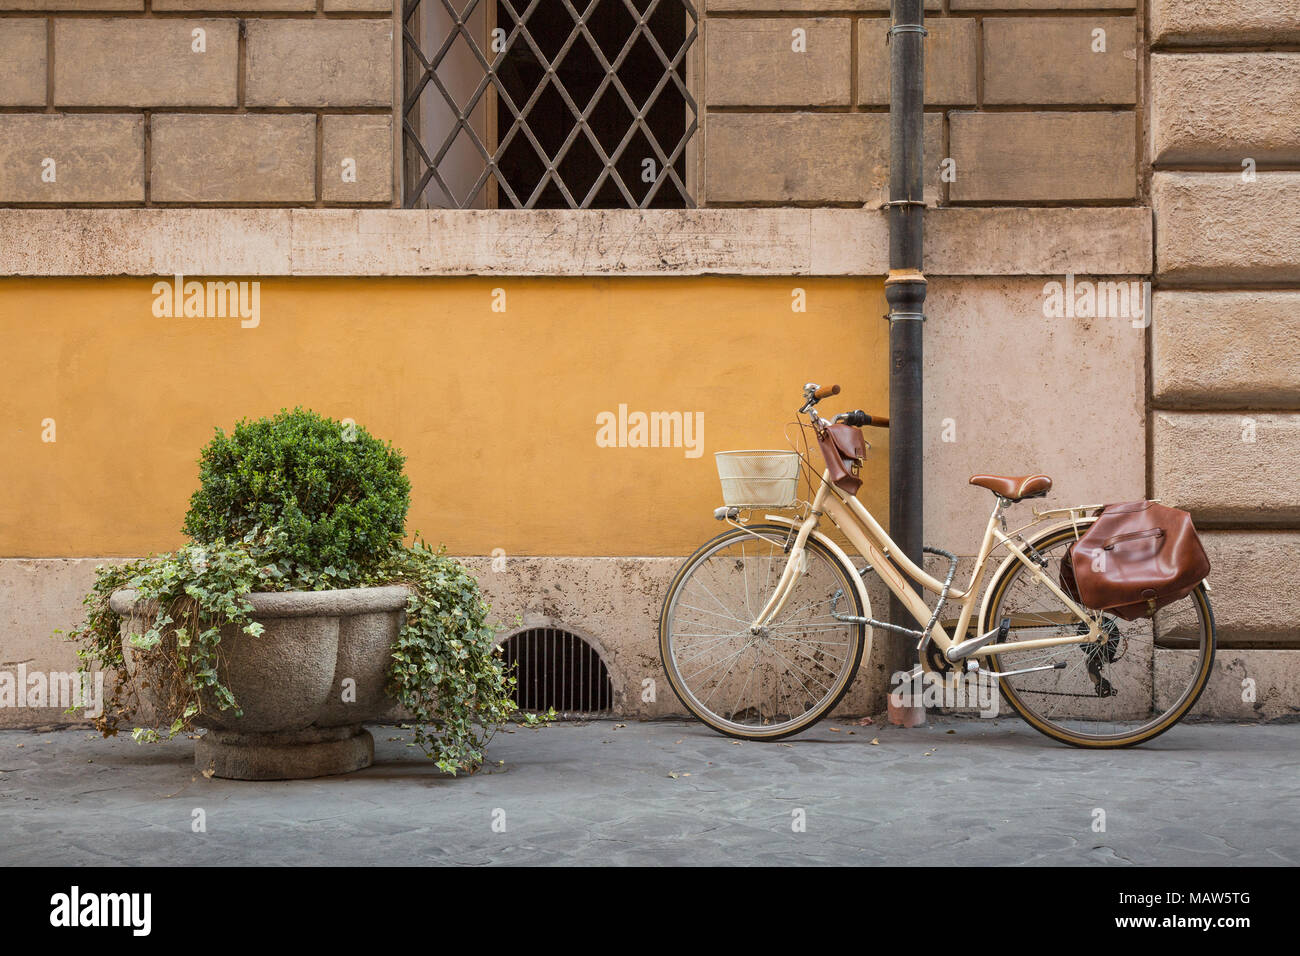 A cream coloured retro style bicycle with brown bags locked up to a drain pipe on a street in Rome, Italy. Stock Photo